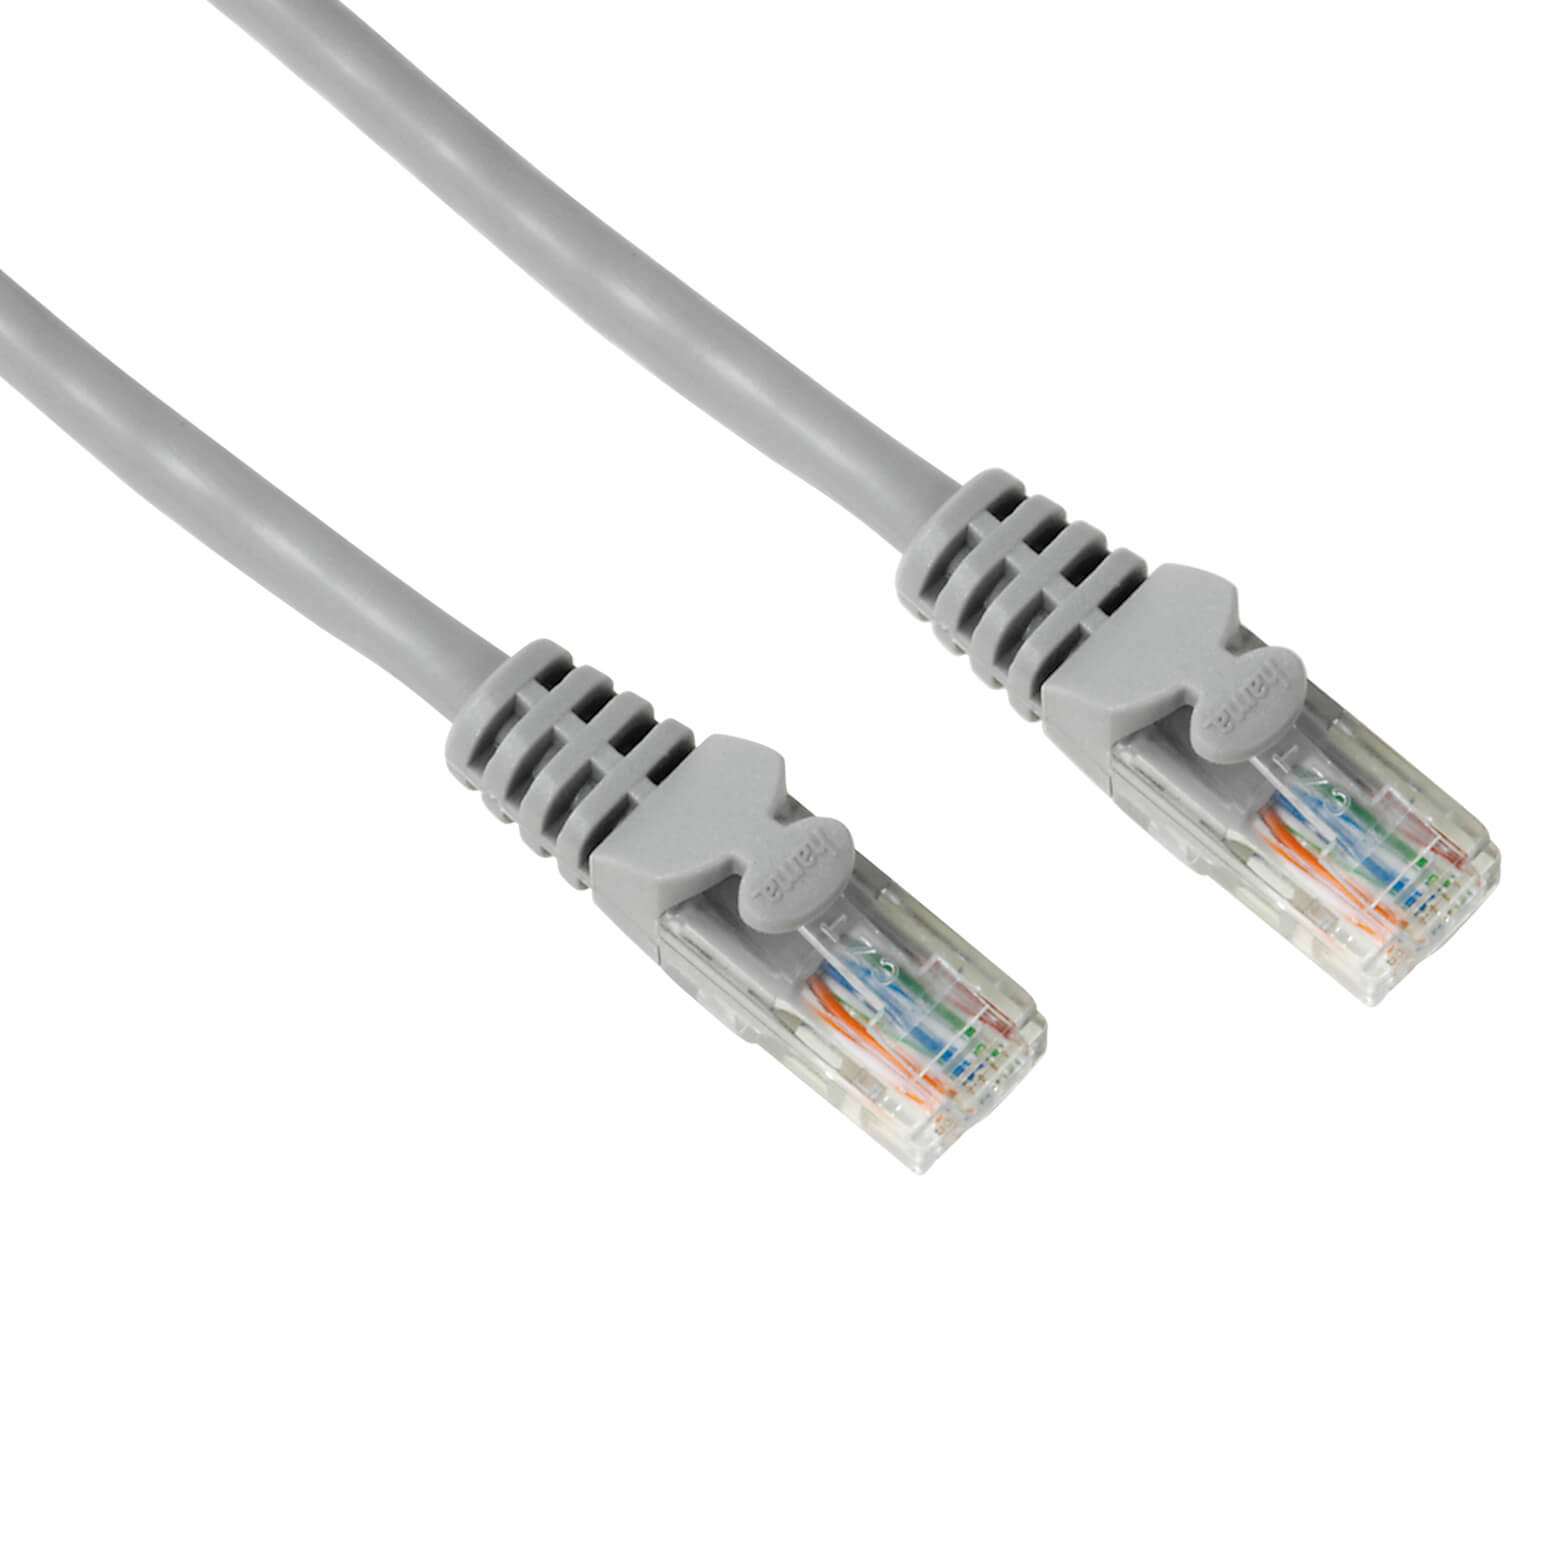 CAT 5e Network Cable UTP, gre y, 3.00 m